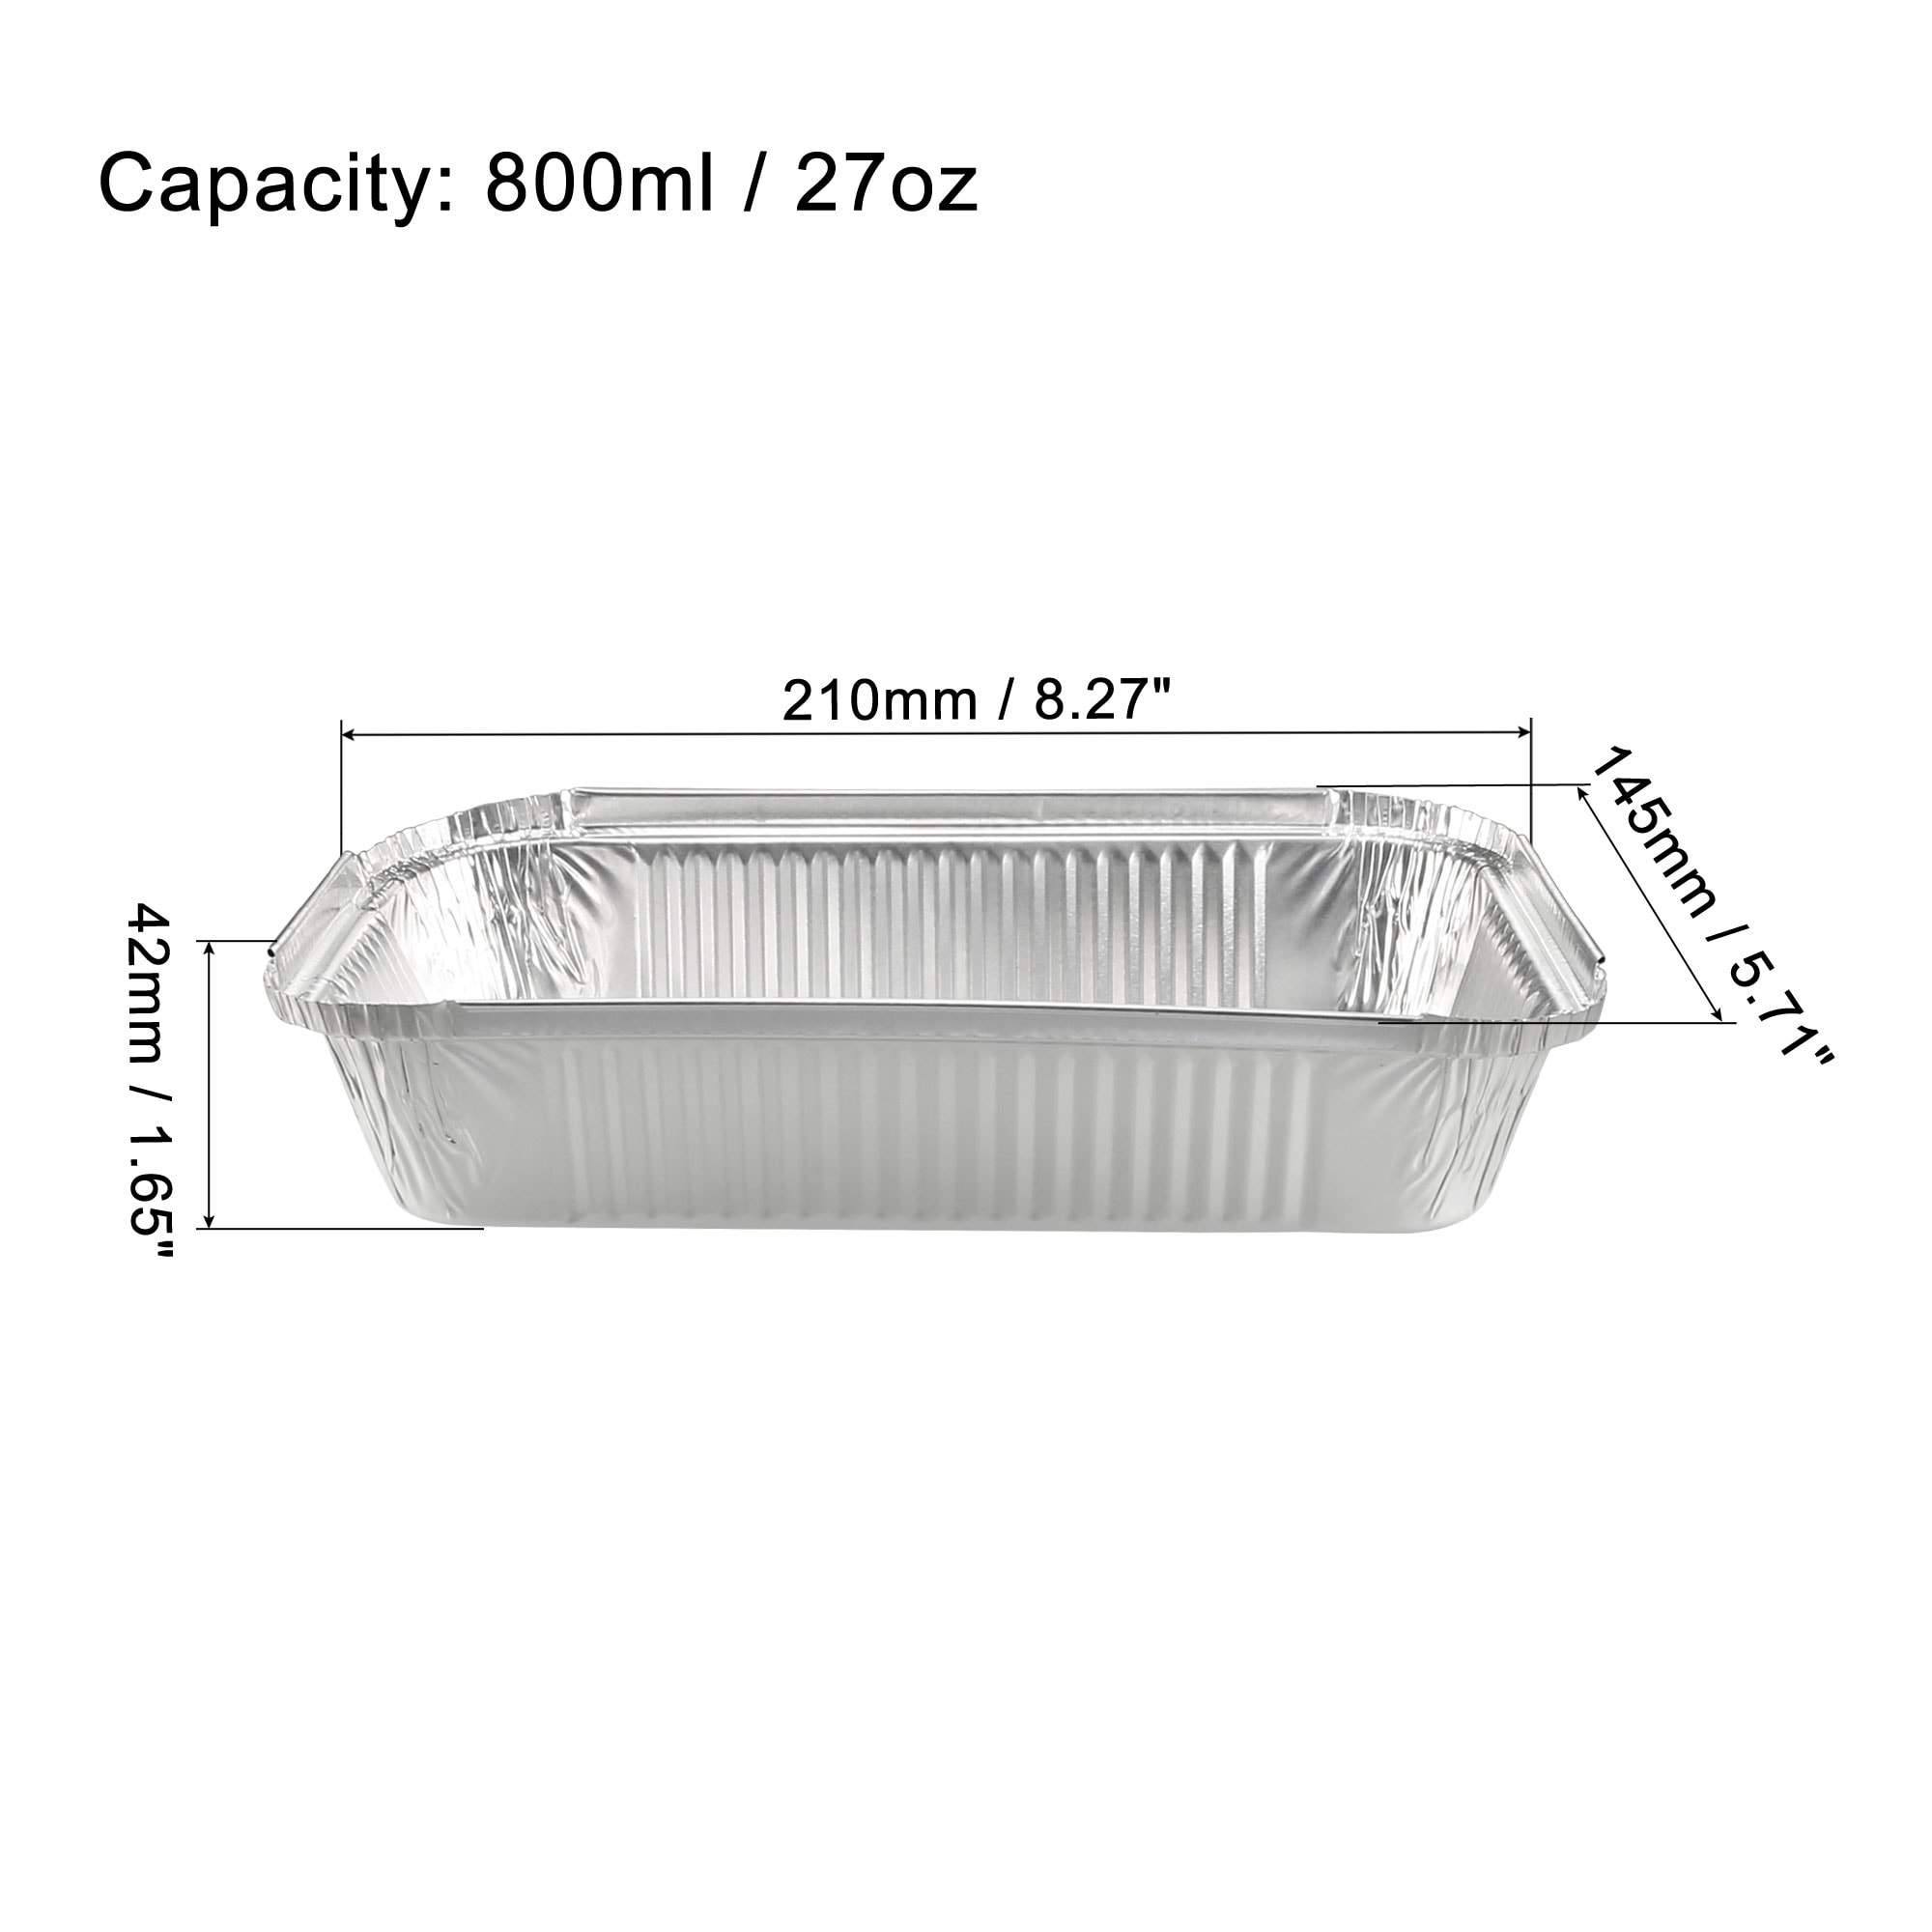 https://ak1.ostkcdn.com/images/products/is/images/direct/31f721a06ca9569d0f8938a5be5ae0e7927ee3b5/Aluminum-Foil-Pans%2C-Disposable-Tray-Container-for-Kitchen-Roasting-Bak.jpg